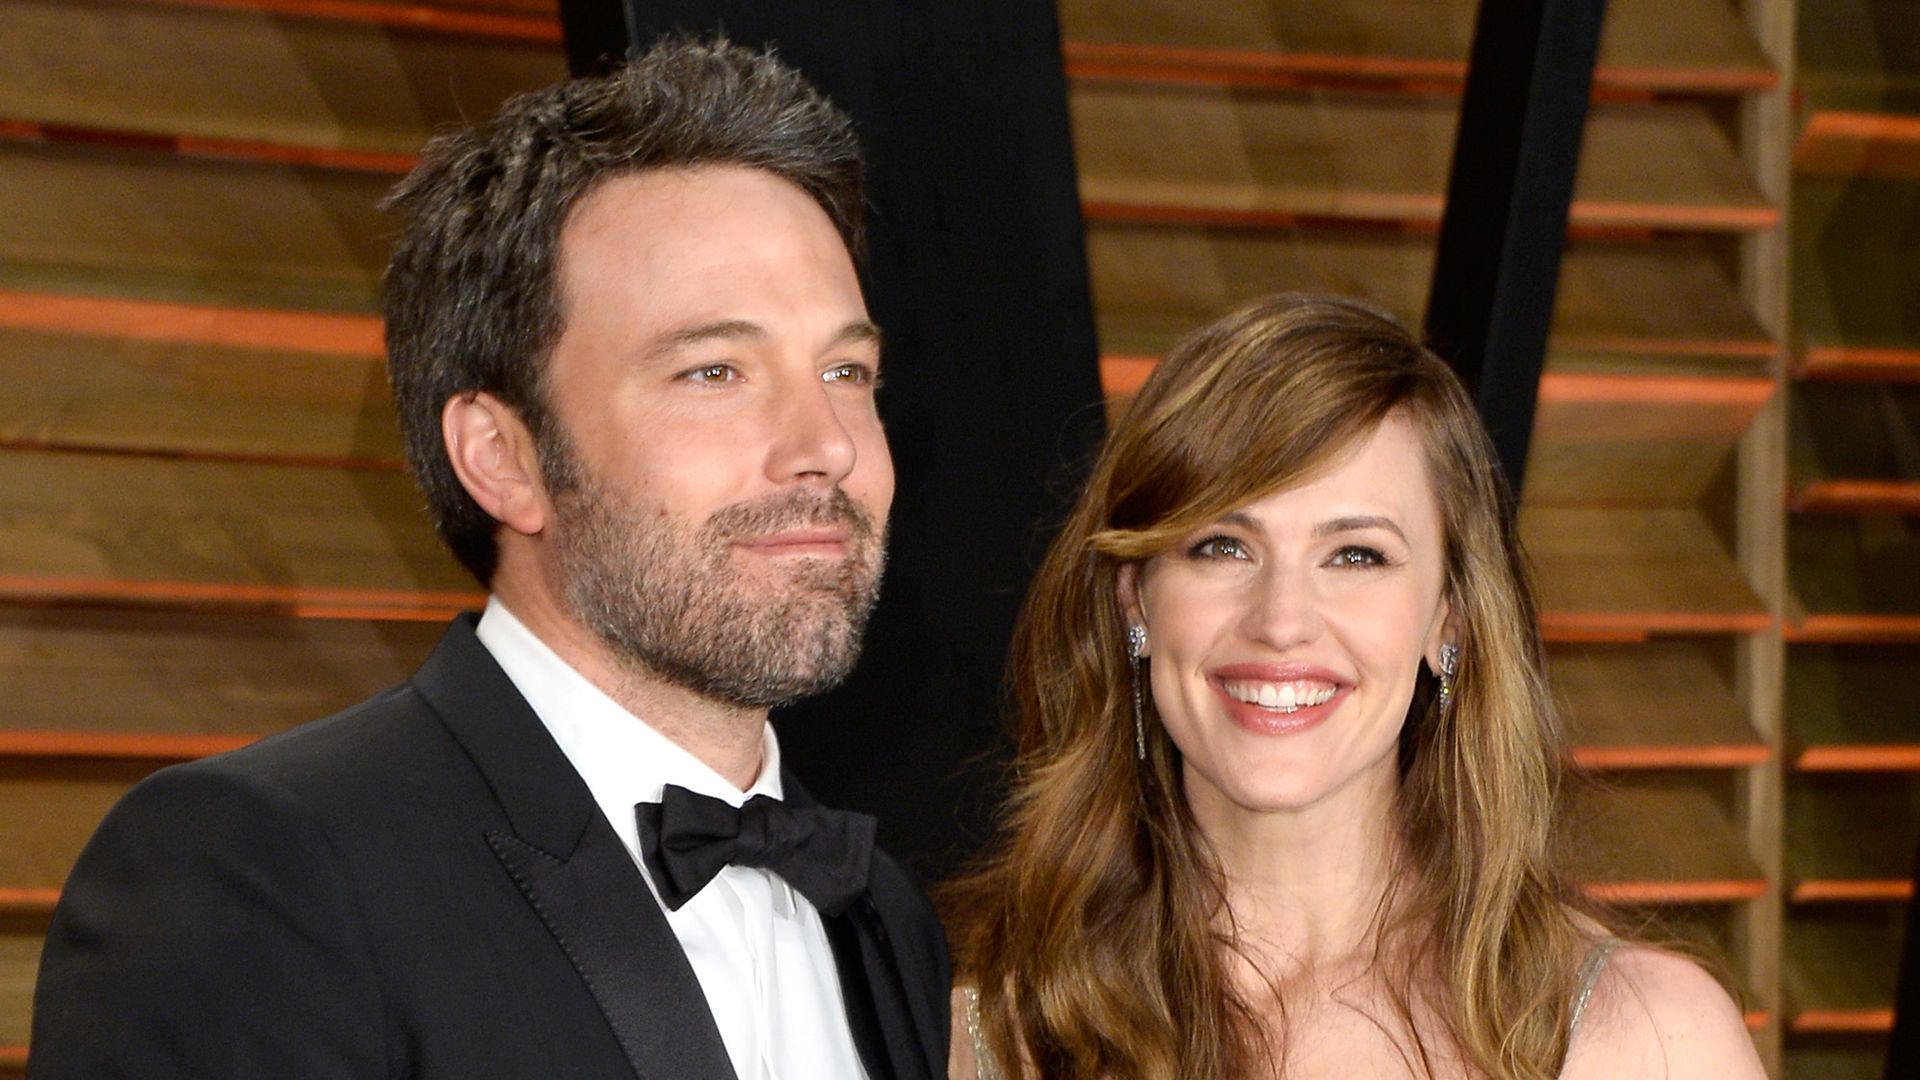 Jennifer Garner's son with Ben Affleck looks just like handsome relative in head-turning photos